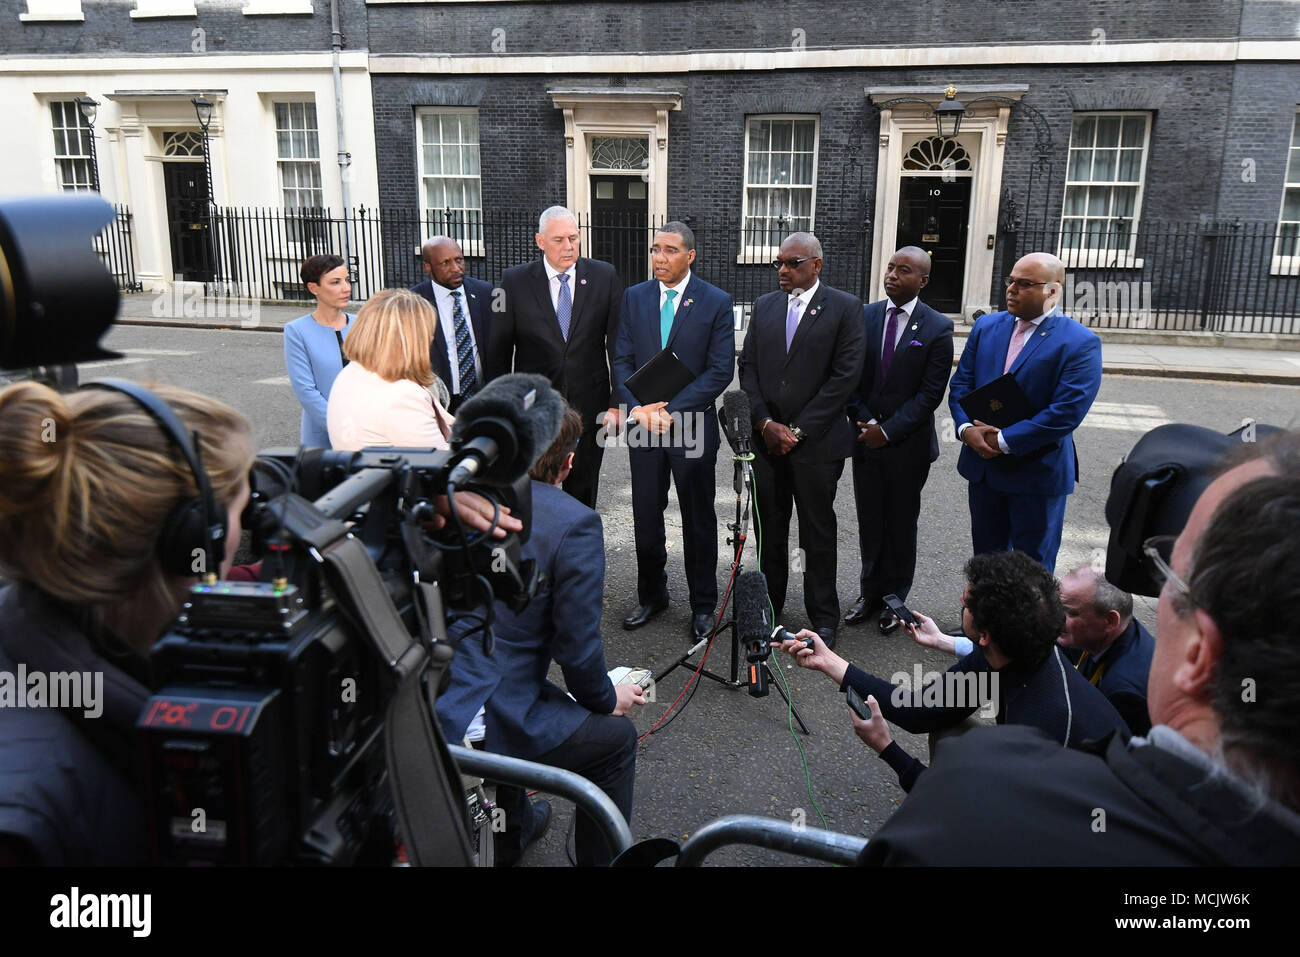 The Prime Minister of Jamaica Andrew Holness, with other members of the delgation, talks to the waiting media in Downing Street after the meeting with Prime Minister Theresa May in relation to the Windrush generation immigration controversy. Stock Photo